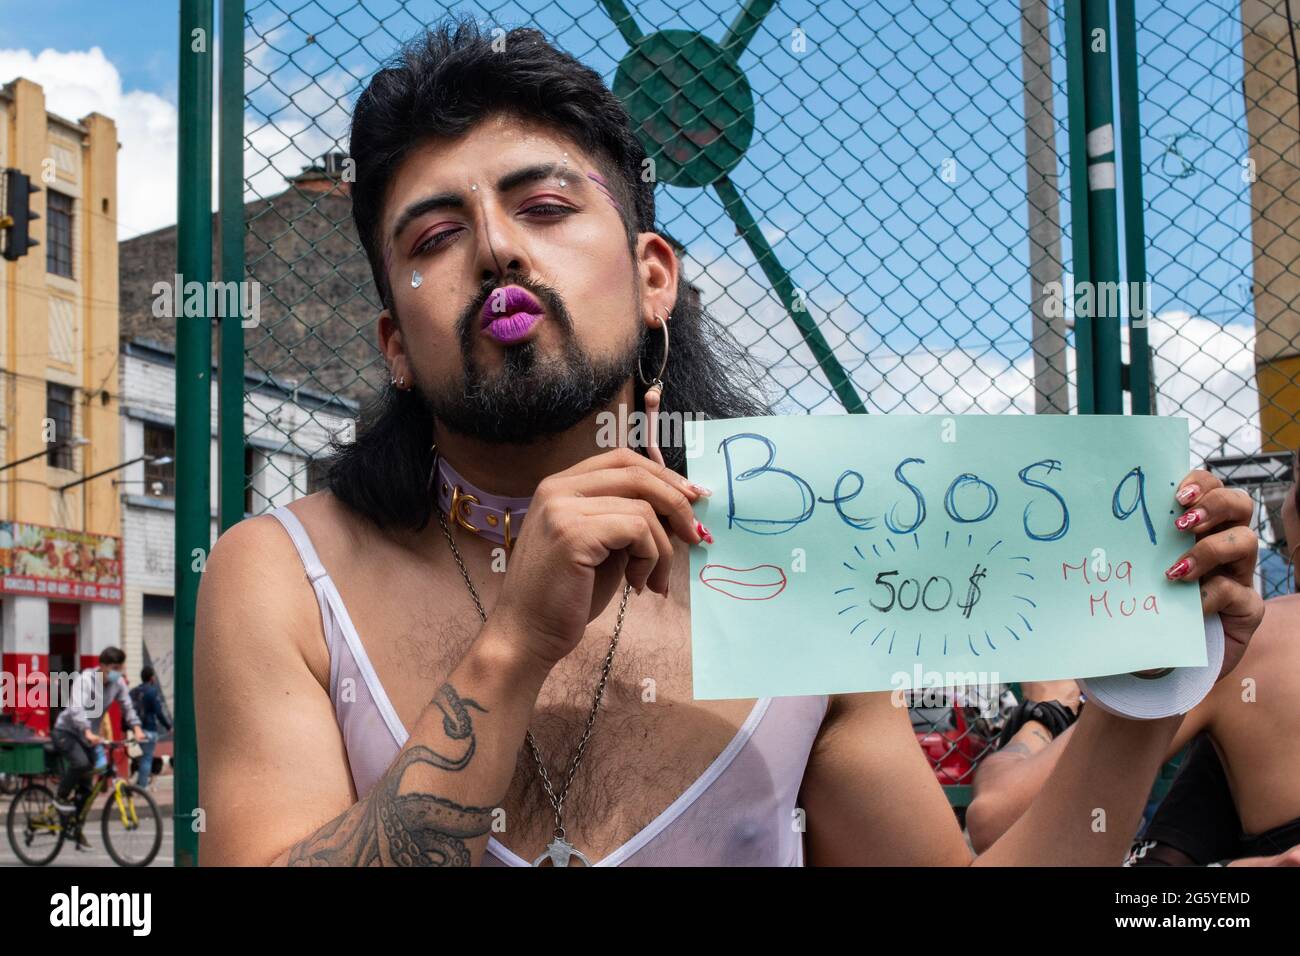 Bogota, Colombia. 28th June, 2021. Transgender community members participate in a vogue dancing event as preparation for the upcoming pride parade in Bogota, Colombia on June 28, 2021. Credit: Long Visual Press/Alamy Live News Stock Photo